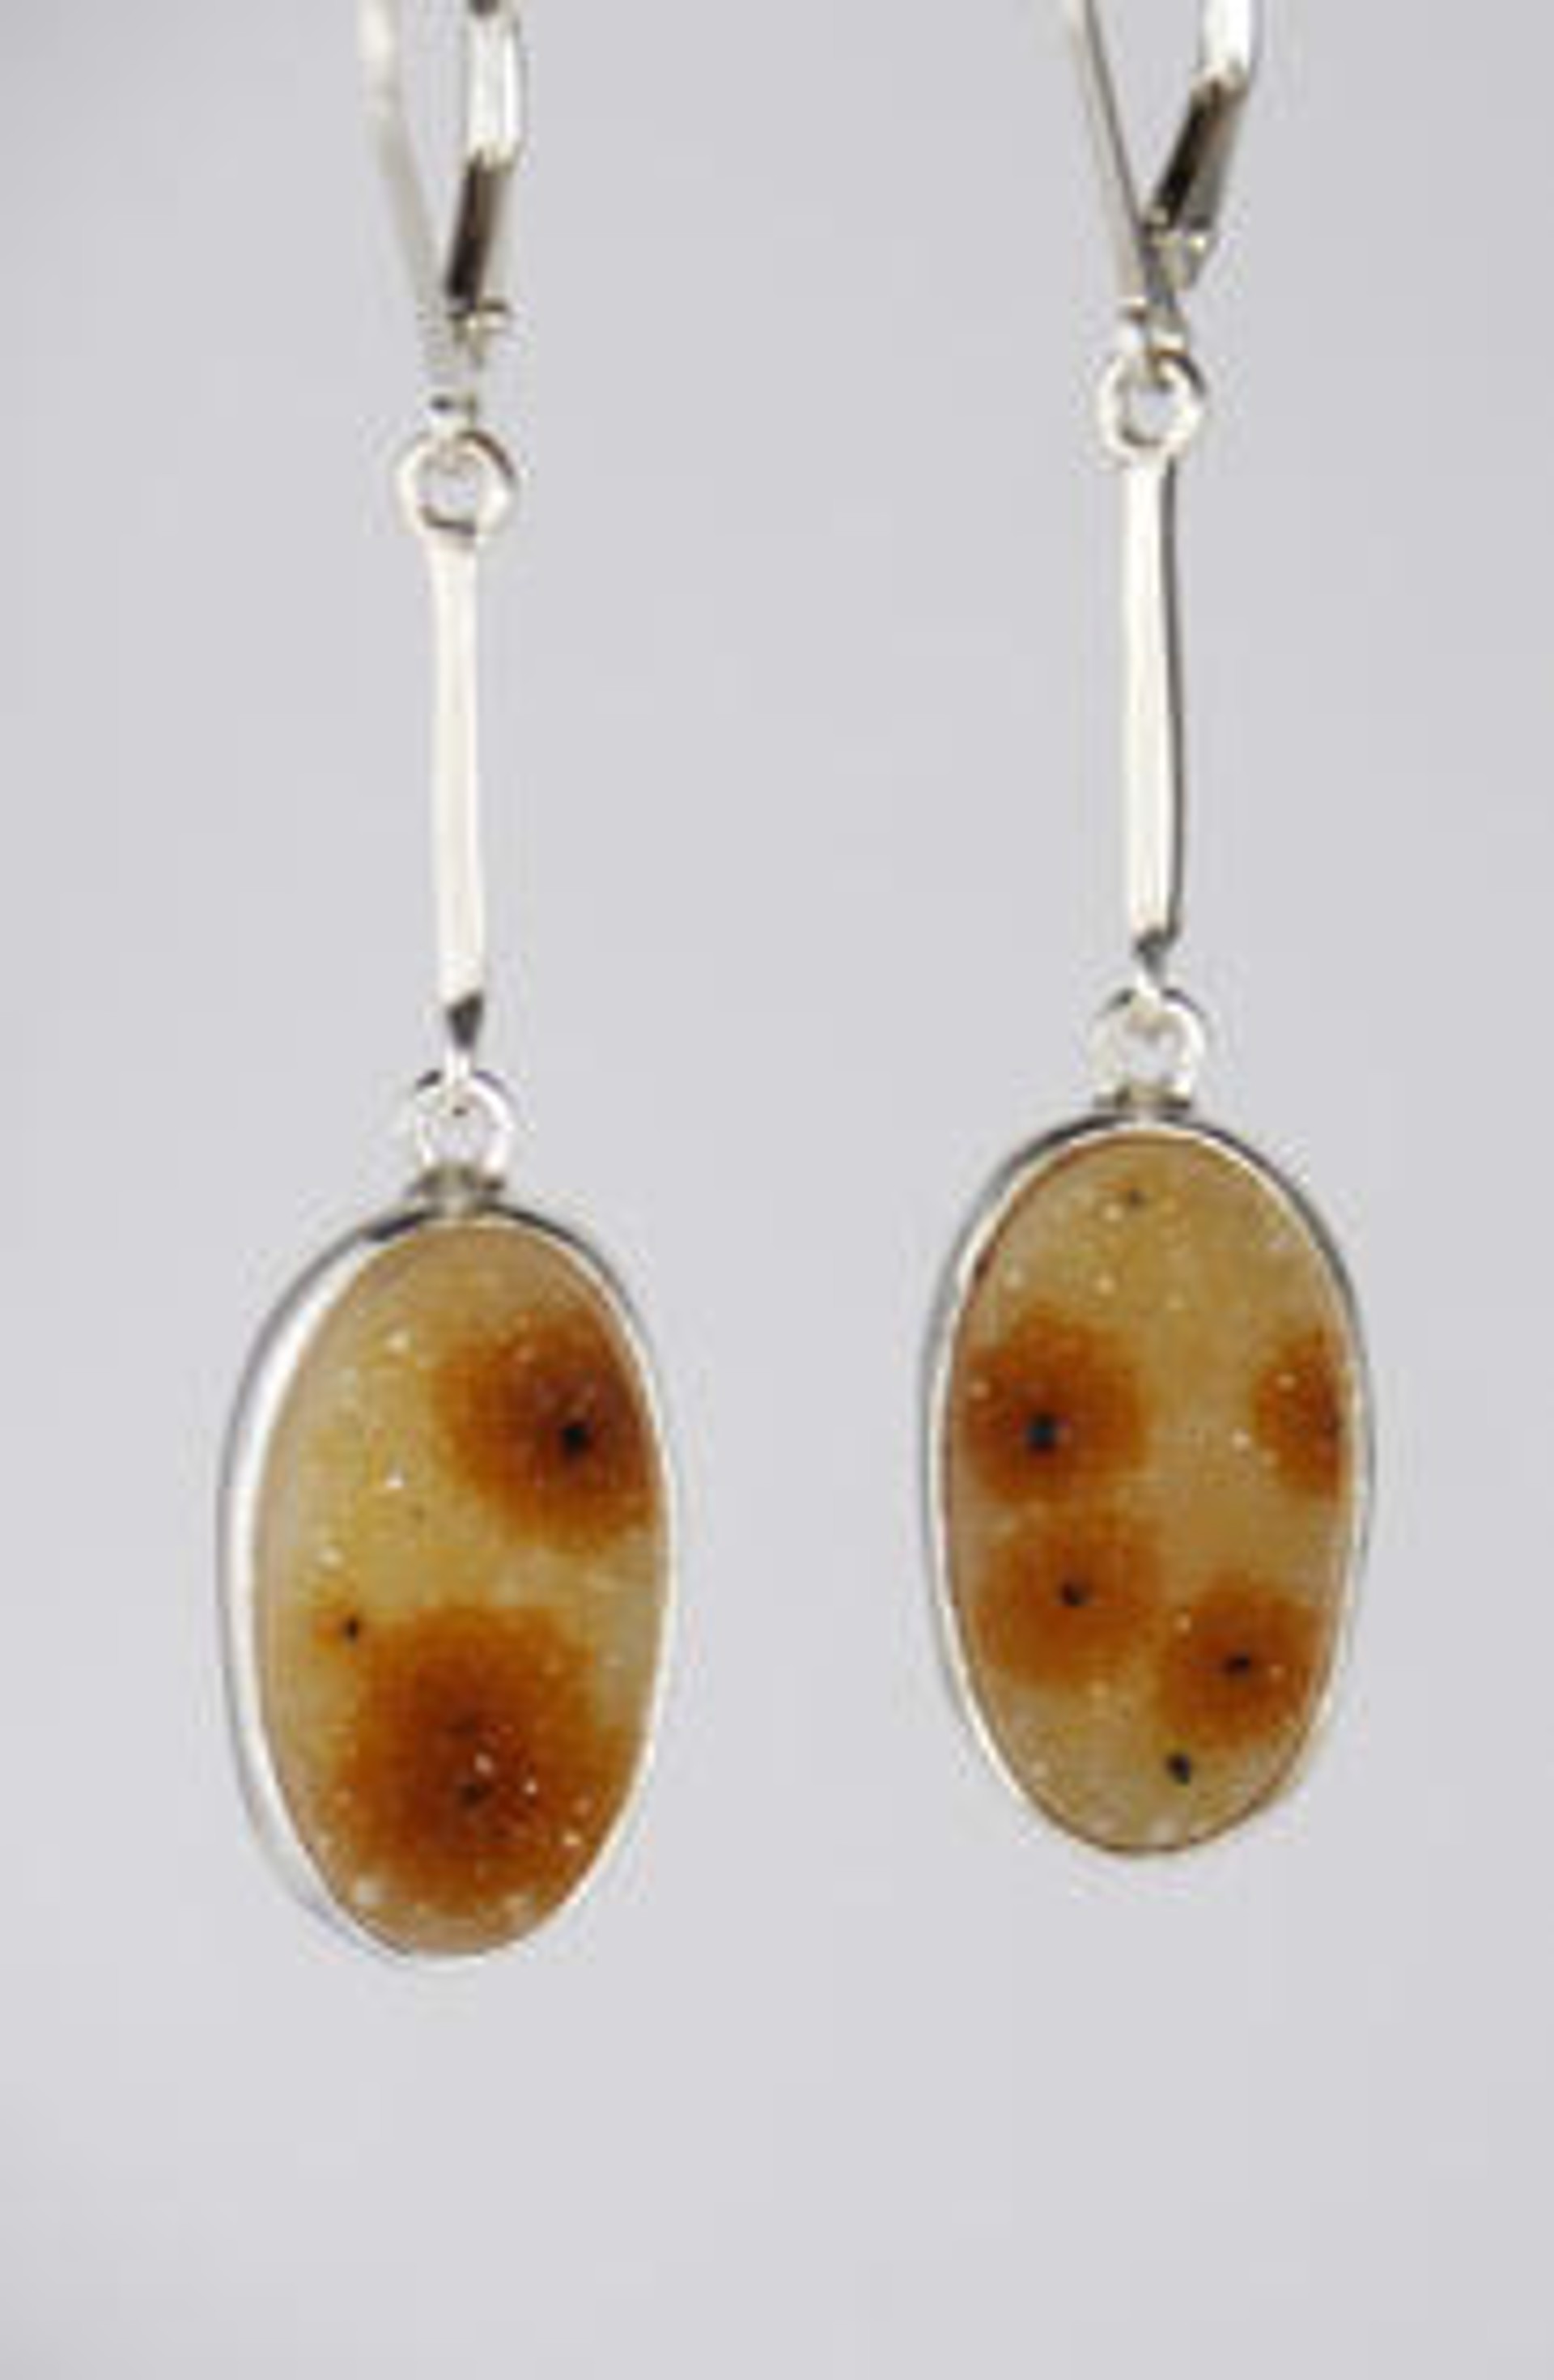 Earrings - Sterling Silver With Druzy Agate - 467 by Ken and Barbara Newman